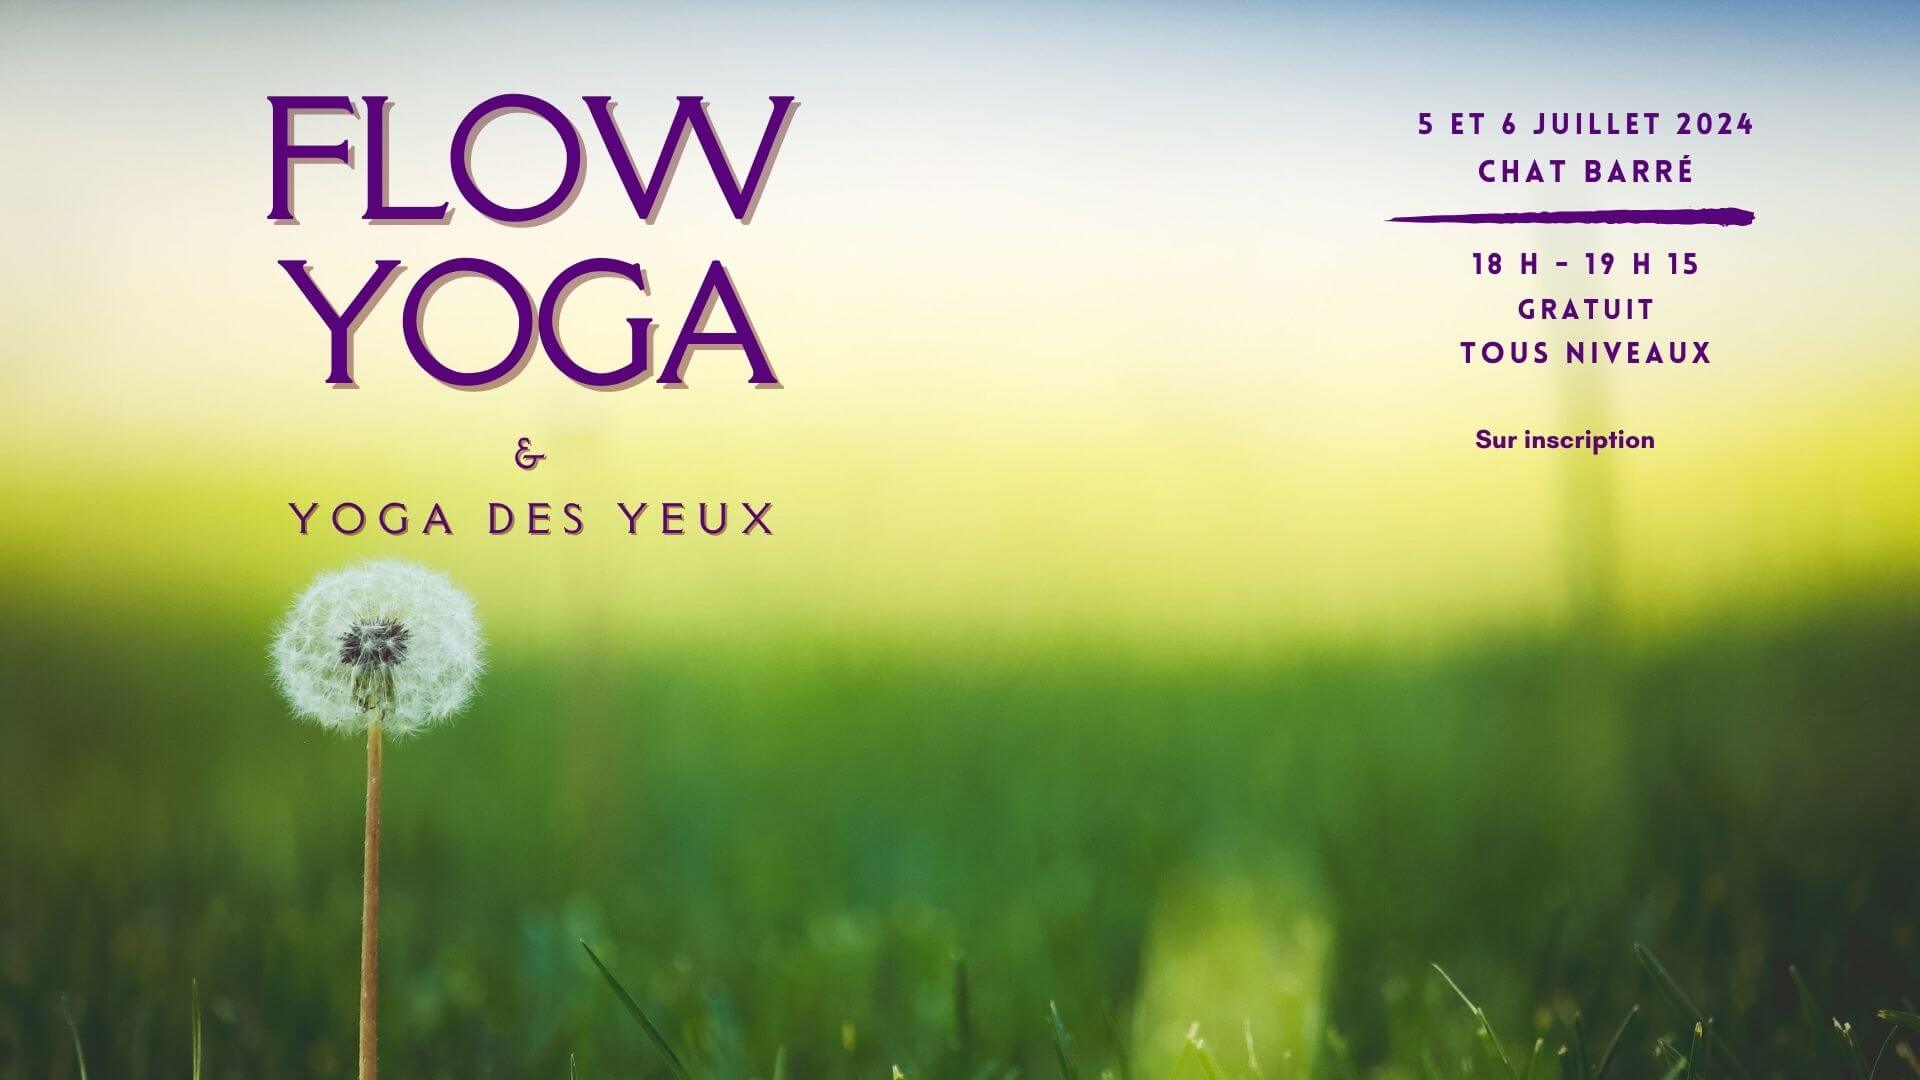 You are currently viewing FLOW YOGA & YOGA DES YEUX